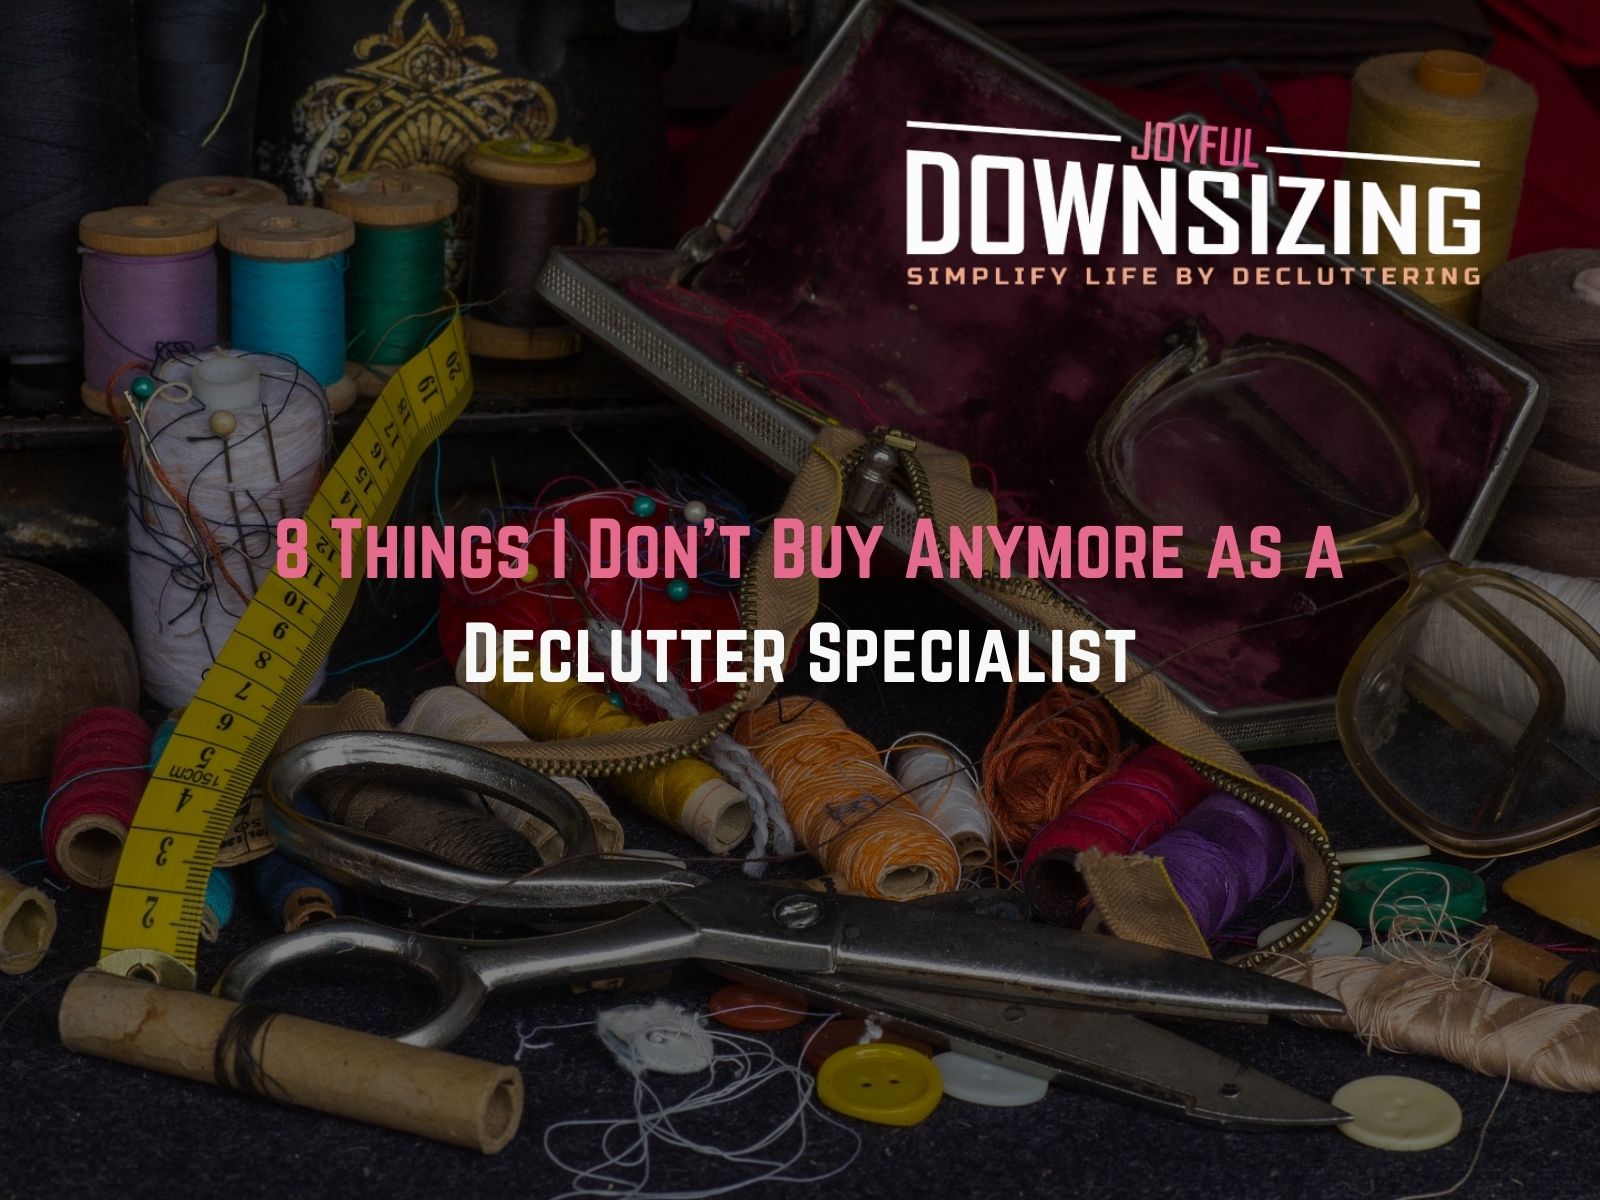 8 Things I Don’t Buy Anymore As a Declutter Specialist